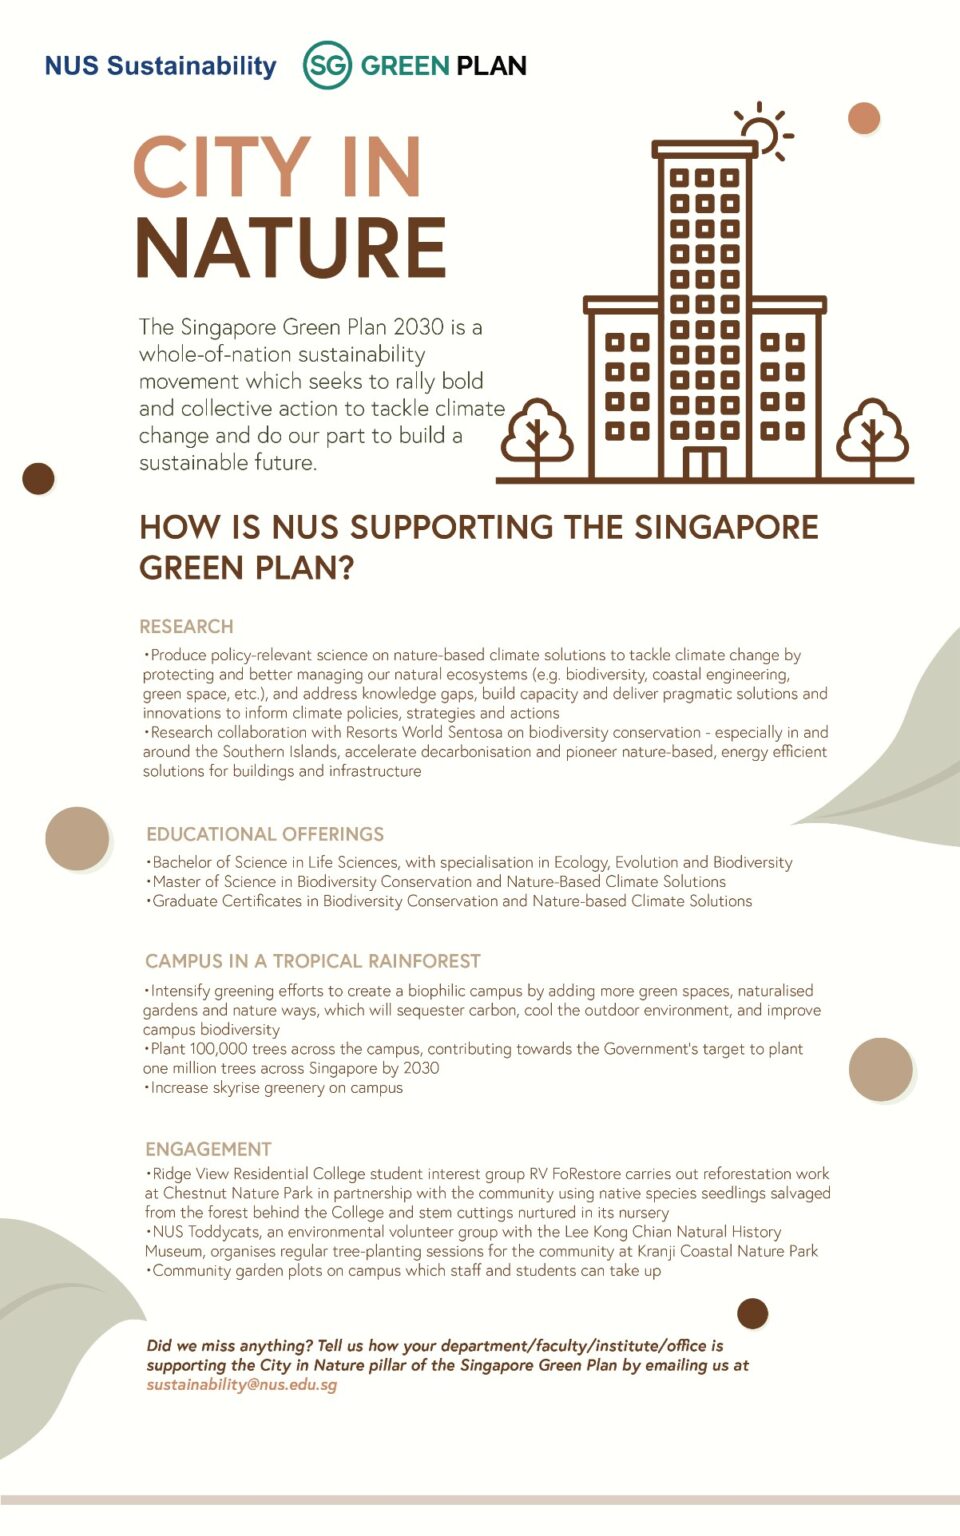 Singapore Green Plan City in nature